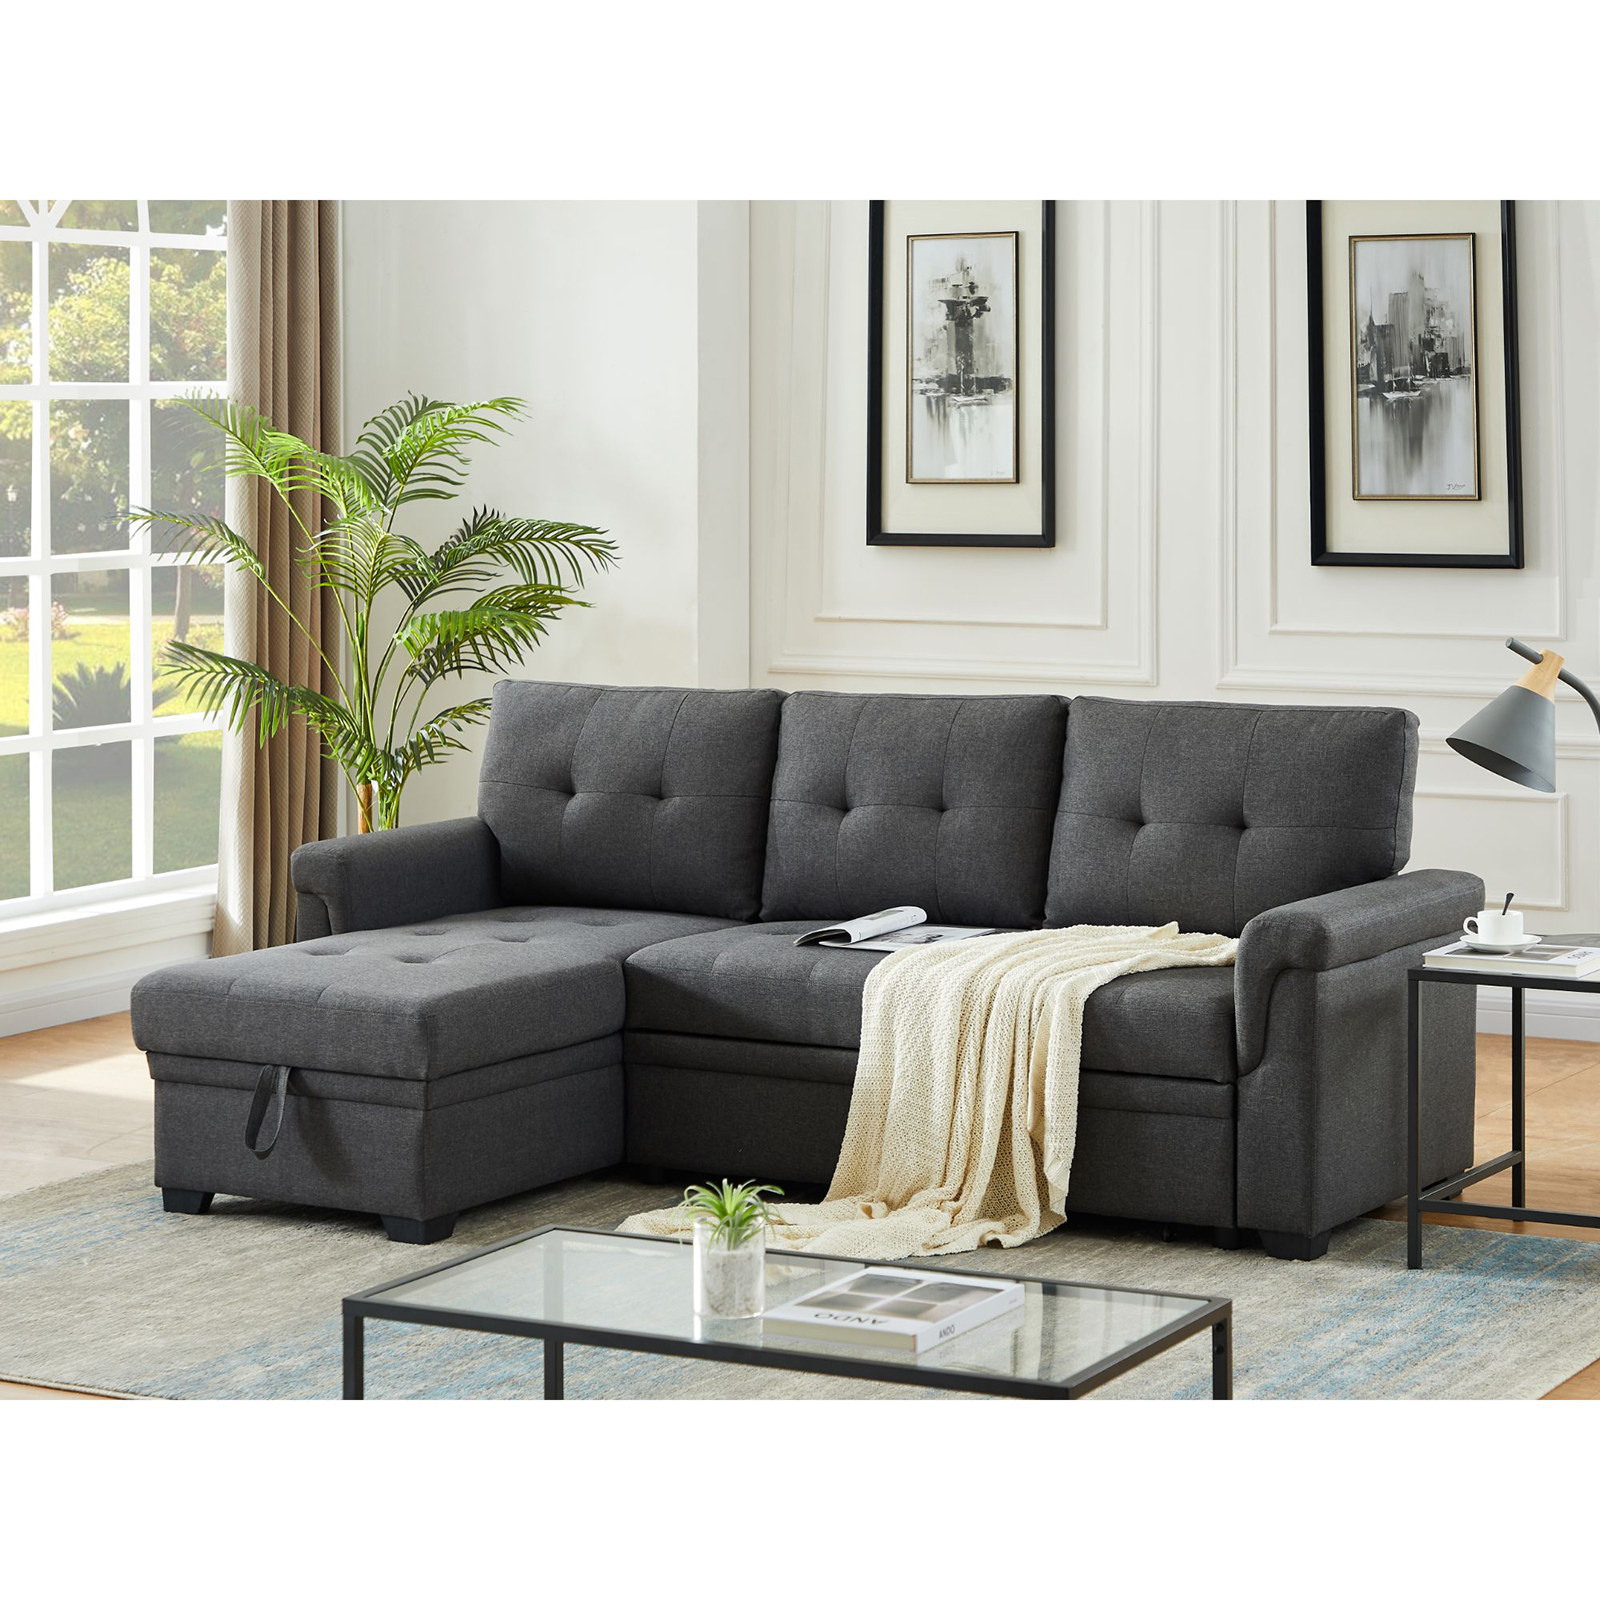 Sofas Couches Sears